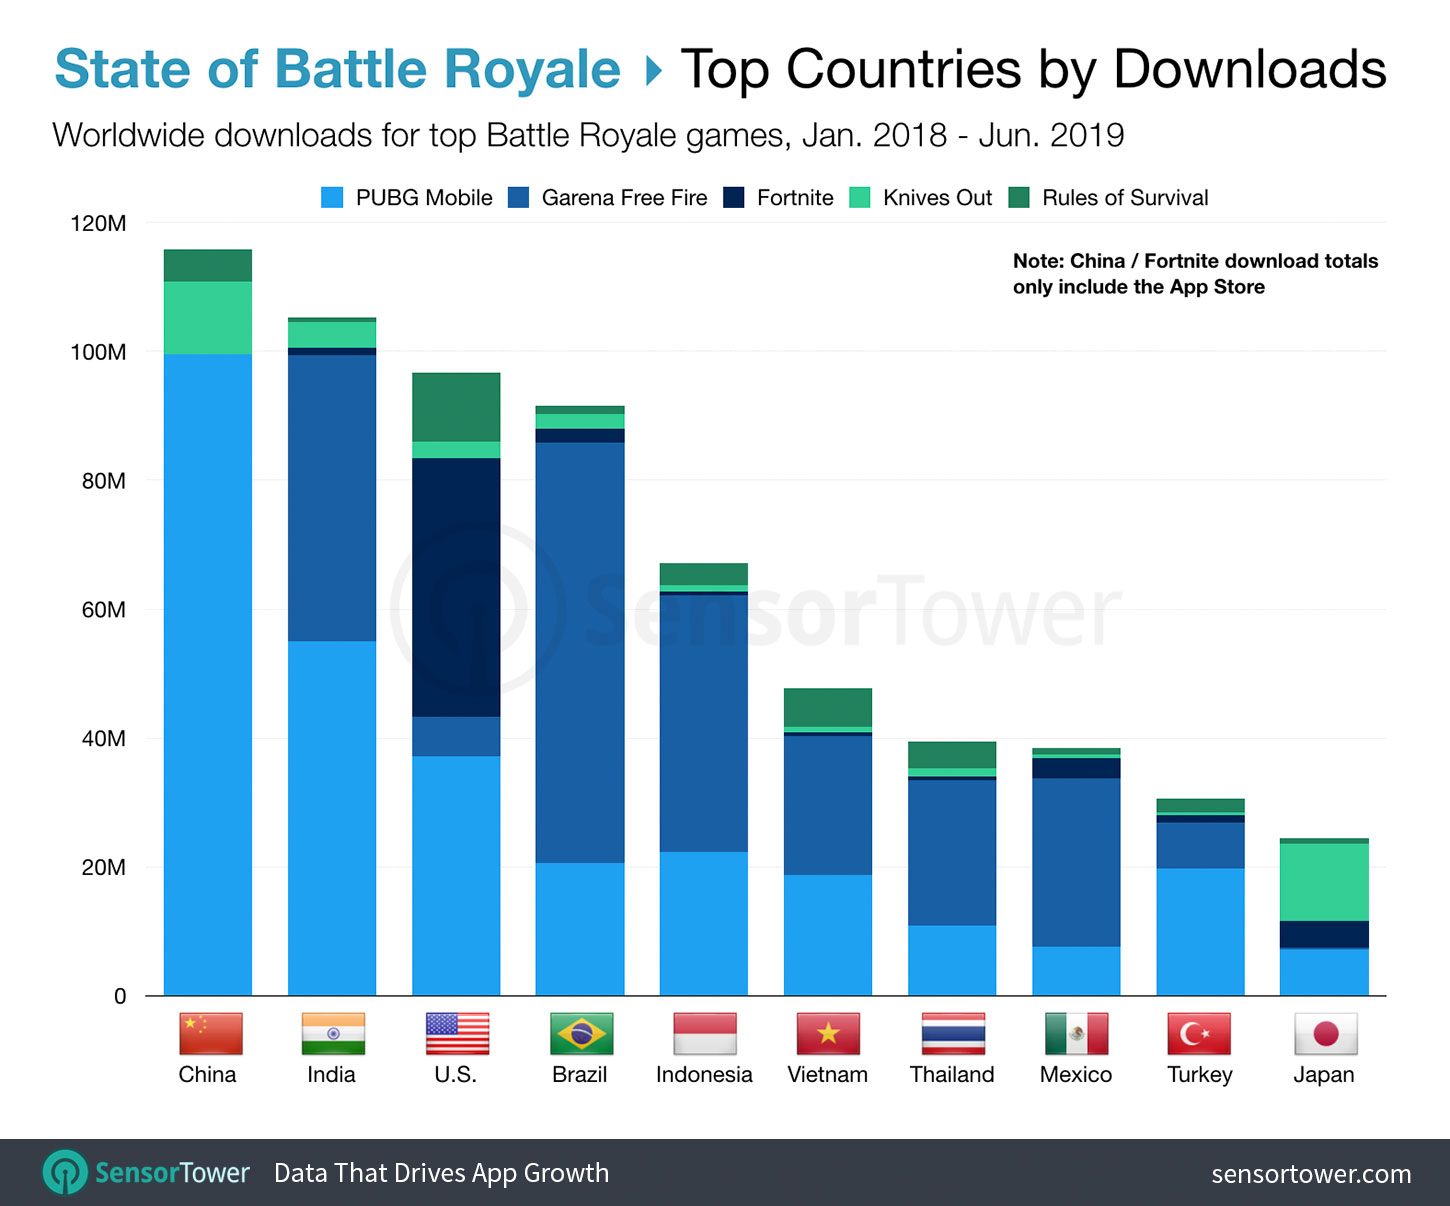 Top Countries by Downloads for Battle Royale Games from Q1 2018 to Q2 2019